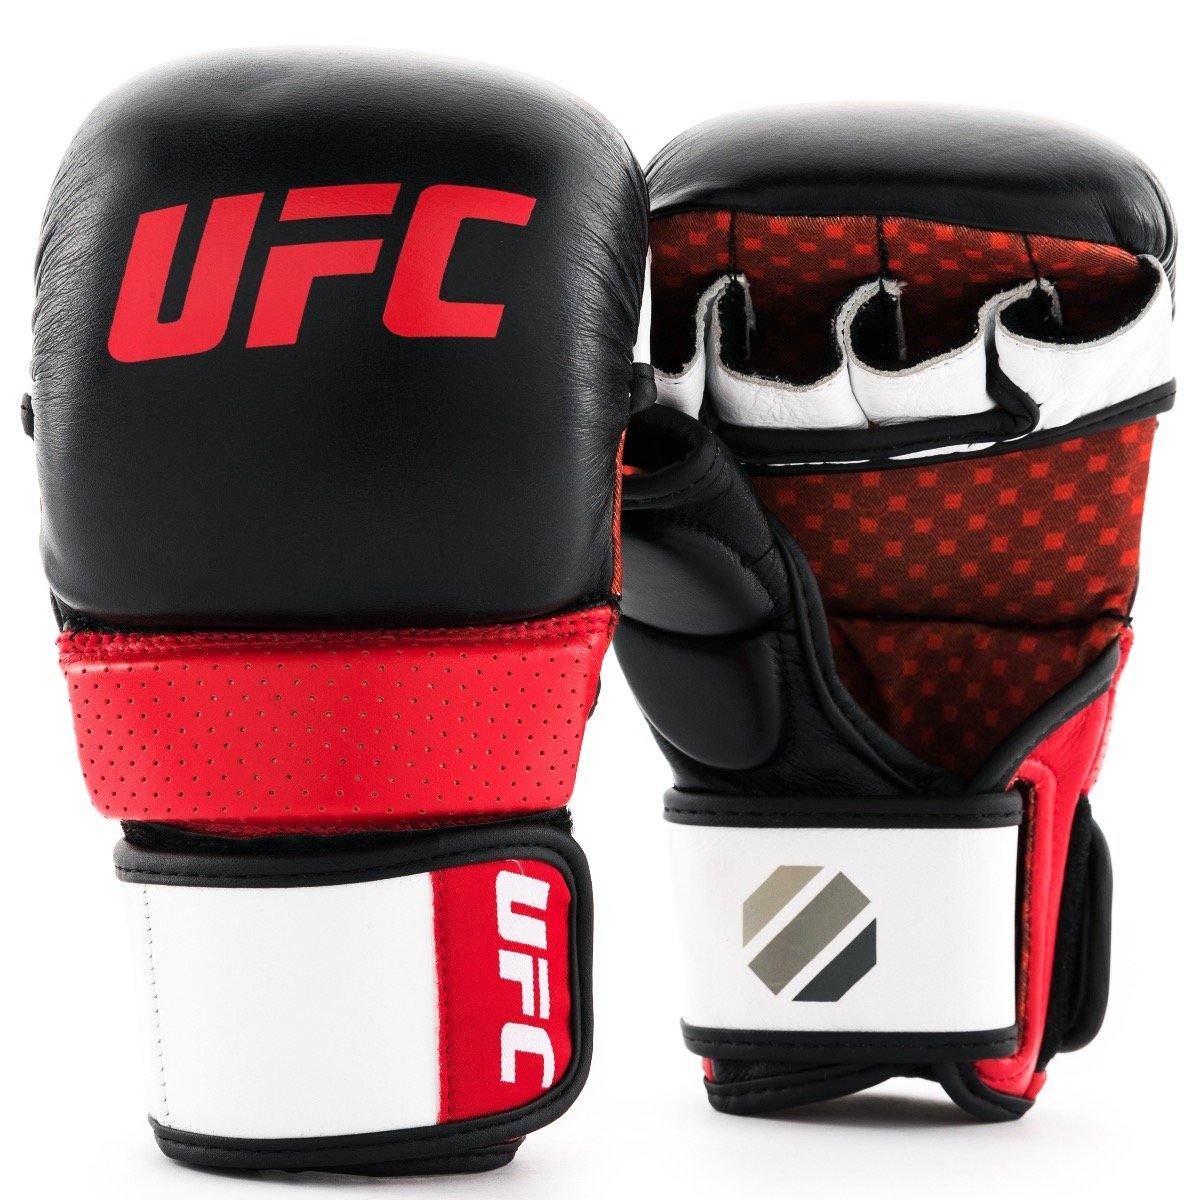 UFC Pro MMA Sparring Glove | Full Coverage Leather MMA Glove